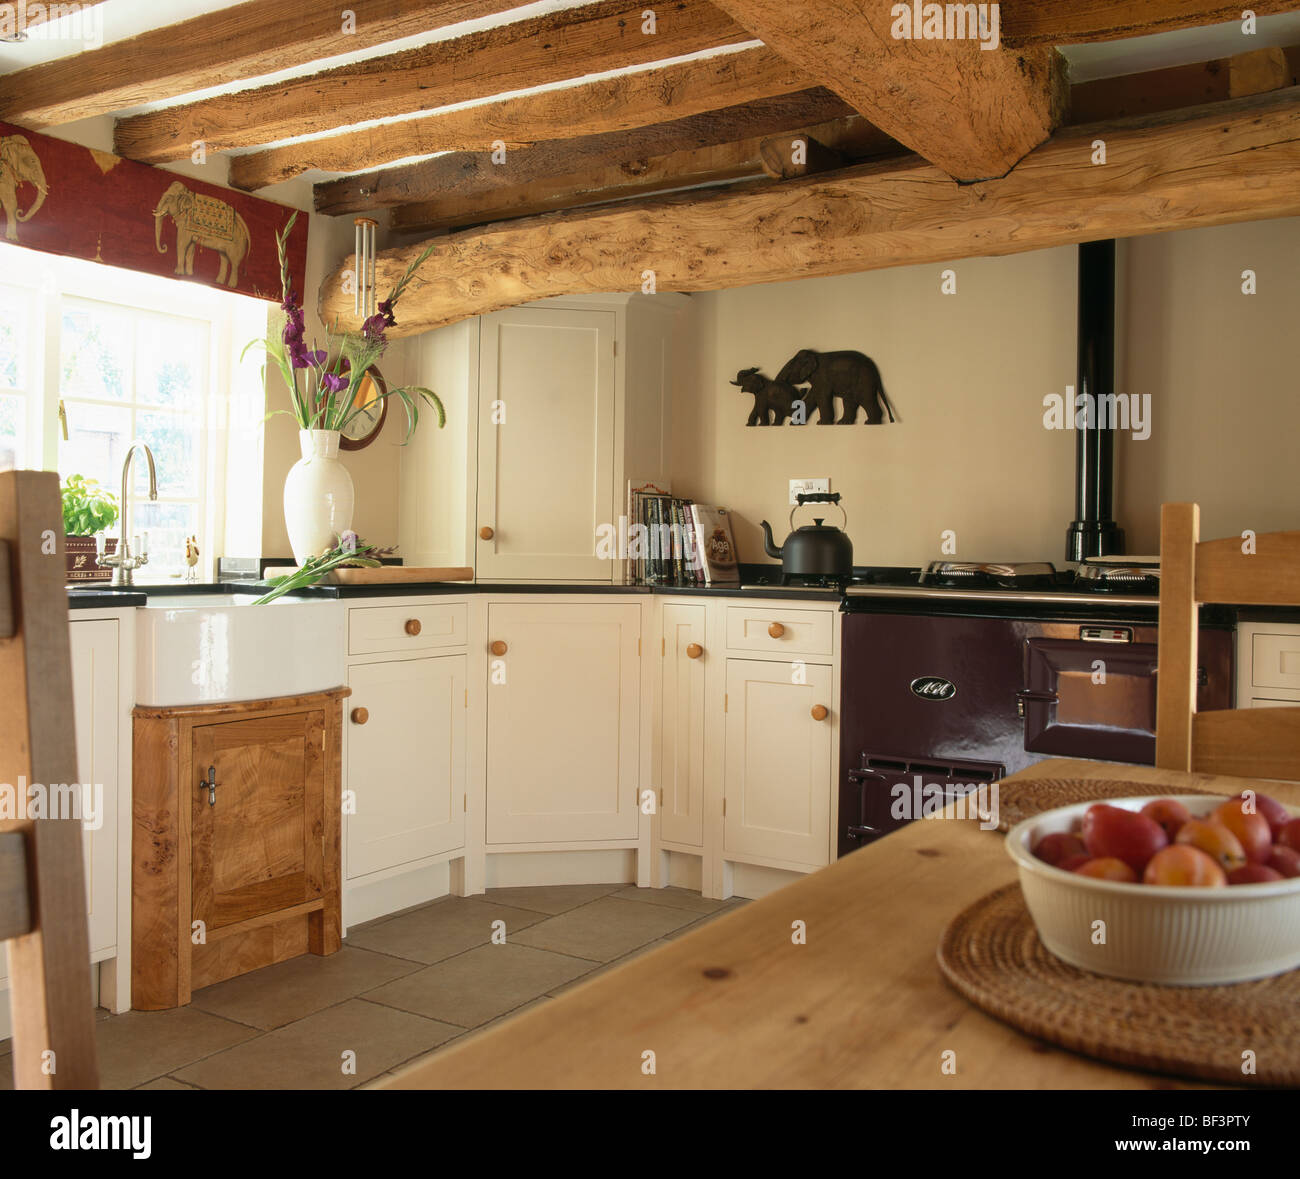 Beamed Ceiling In Traditional Country Cottage Kitchen With Purple